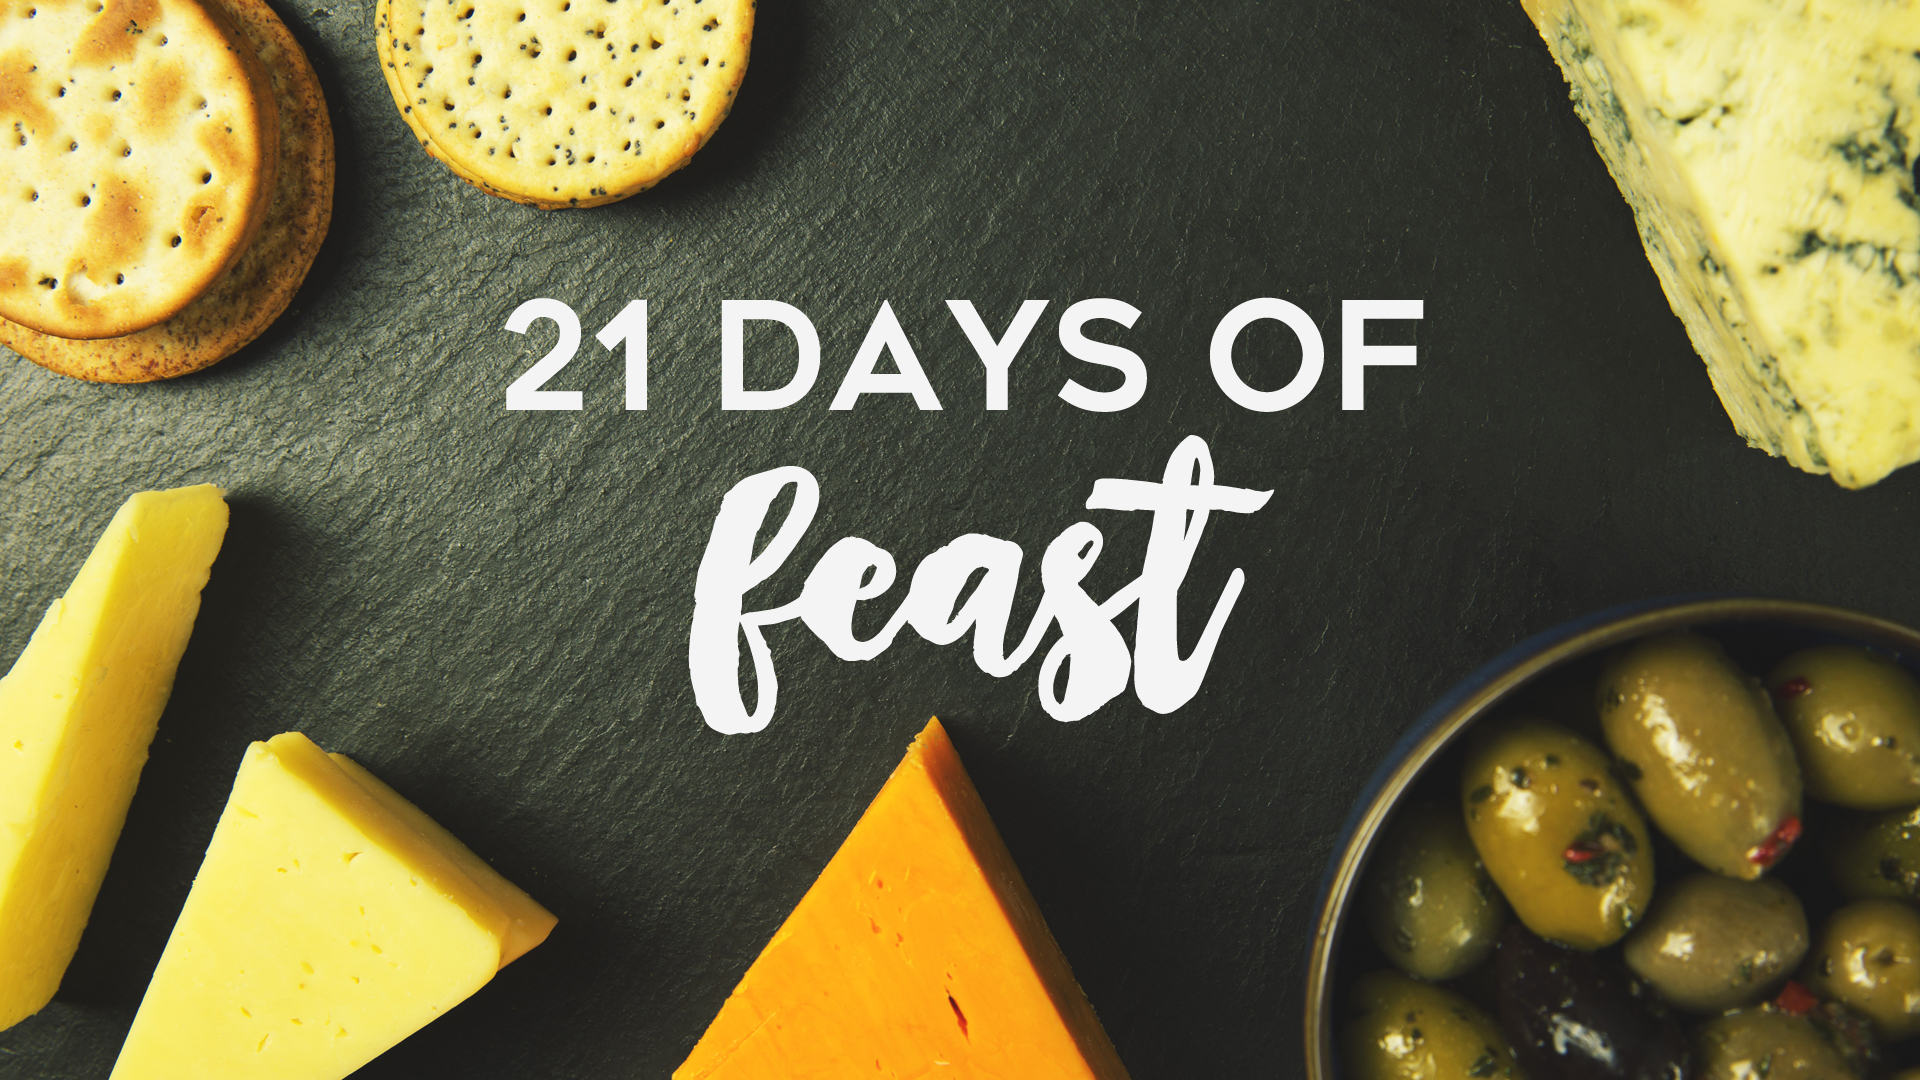 21 Days of Feast: The Feast of the Firstfruits